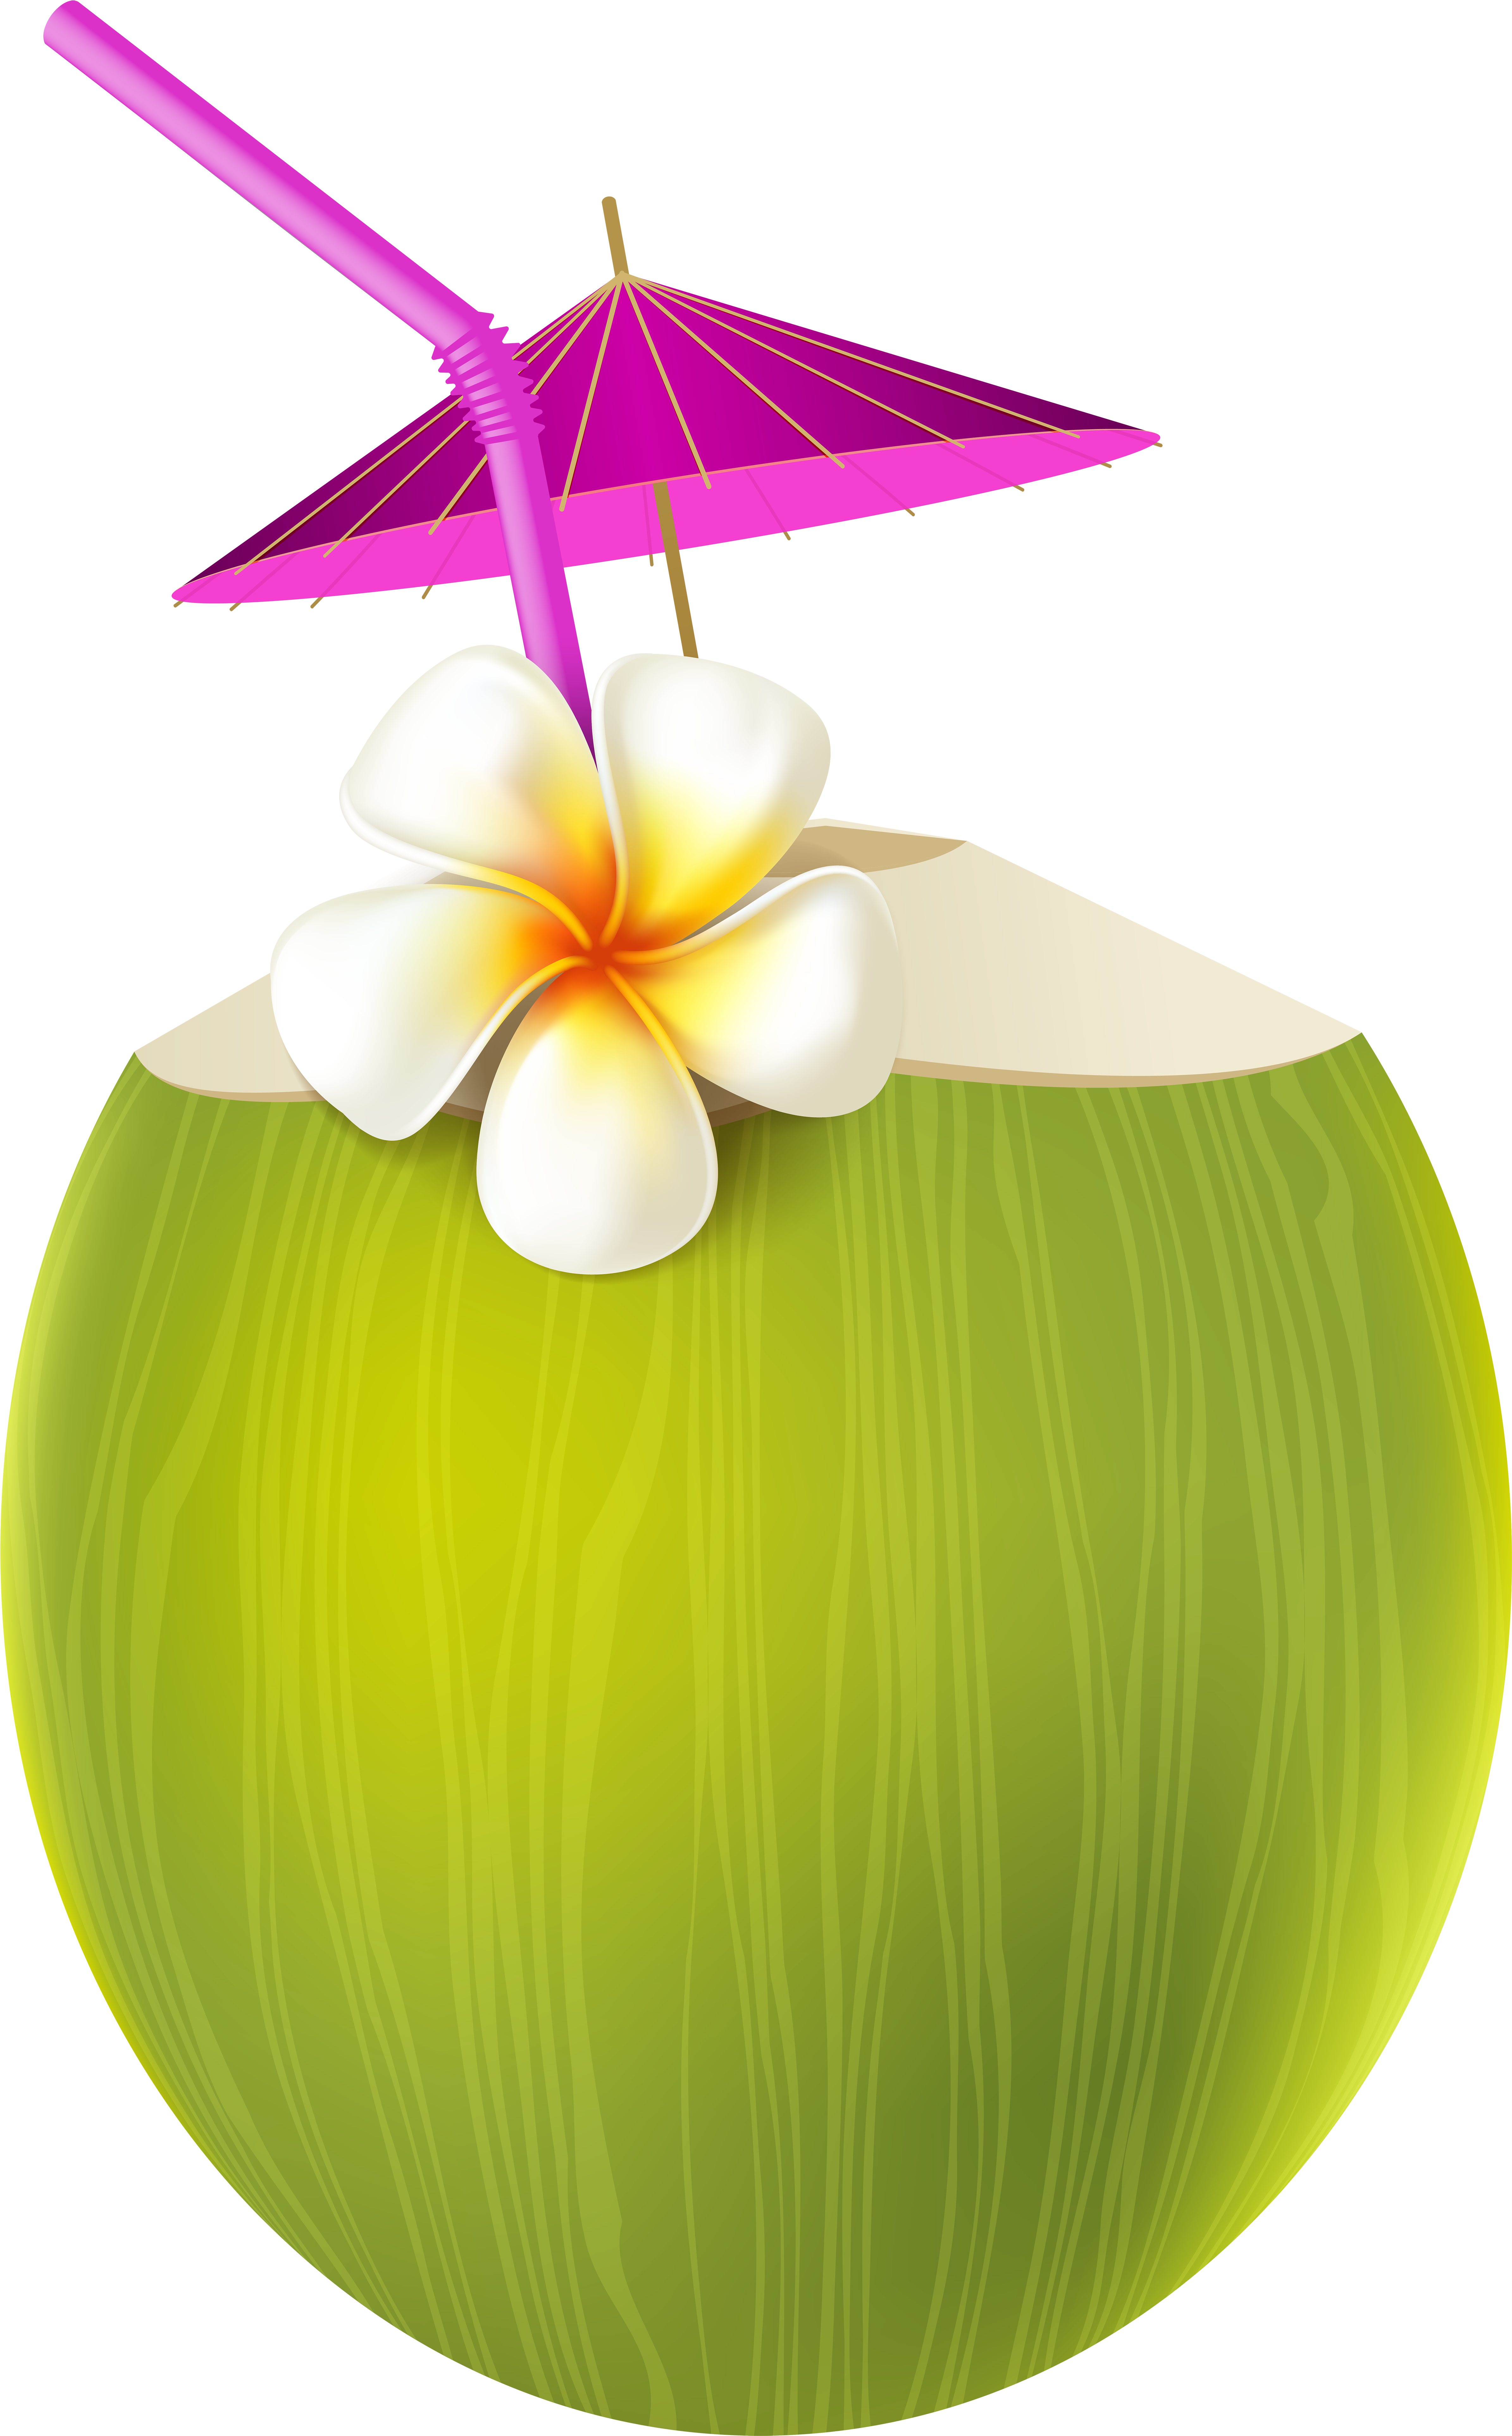 Aloha Party, Luau Party, Summer Parties, Pool Parties, - Summer Drinks Clipart Png (4965x8000)